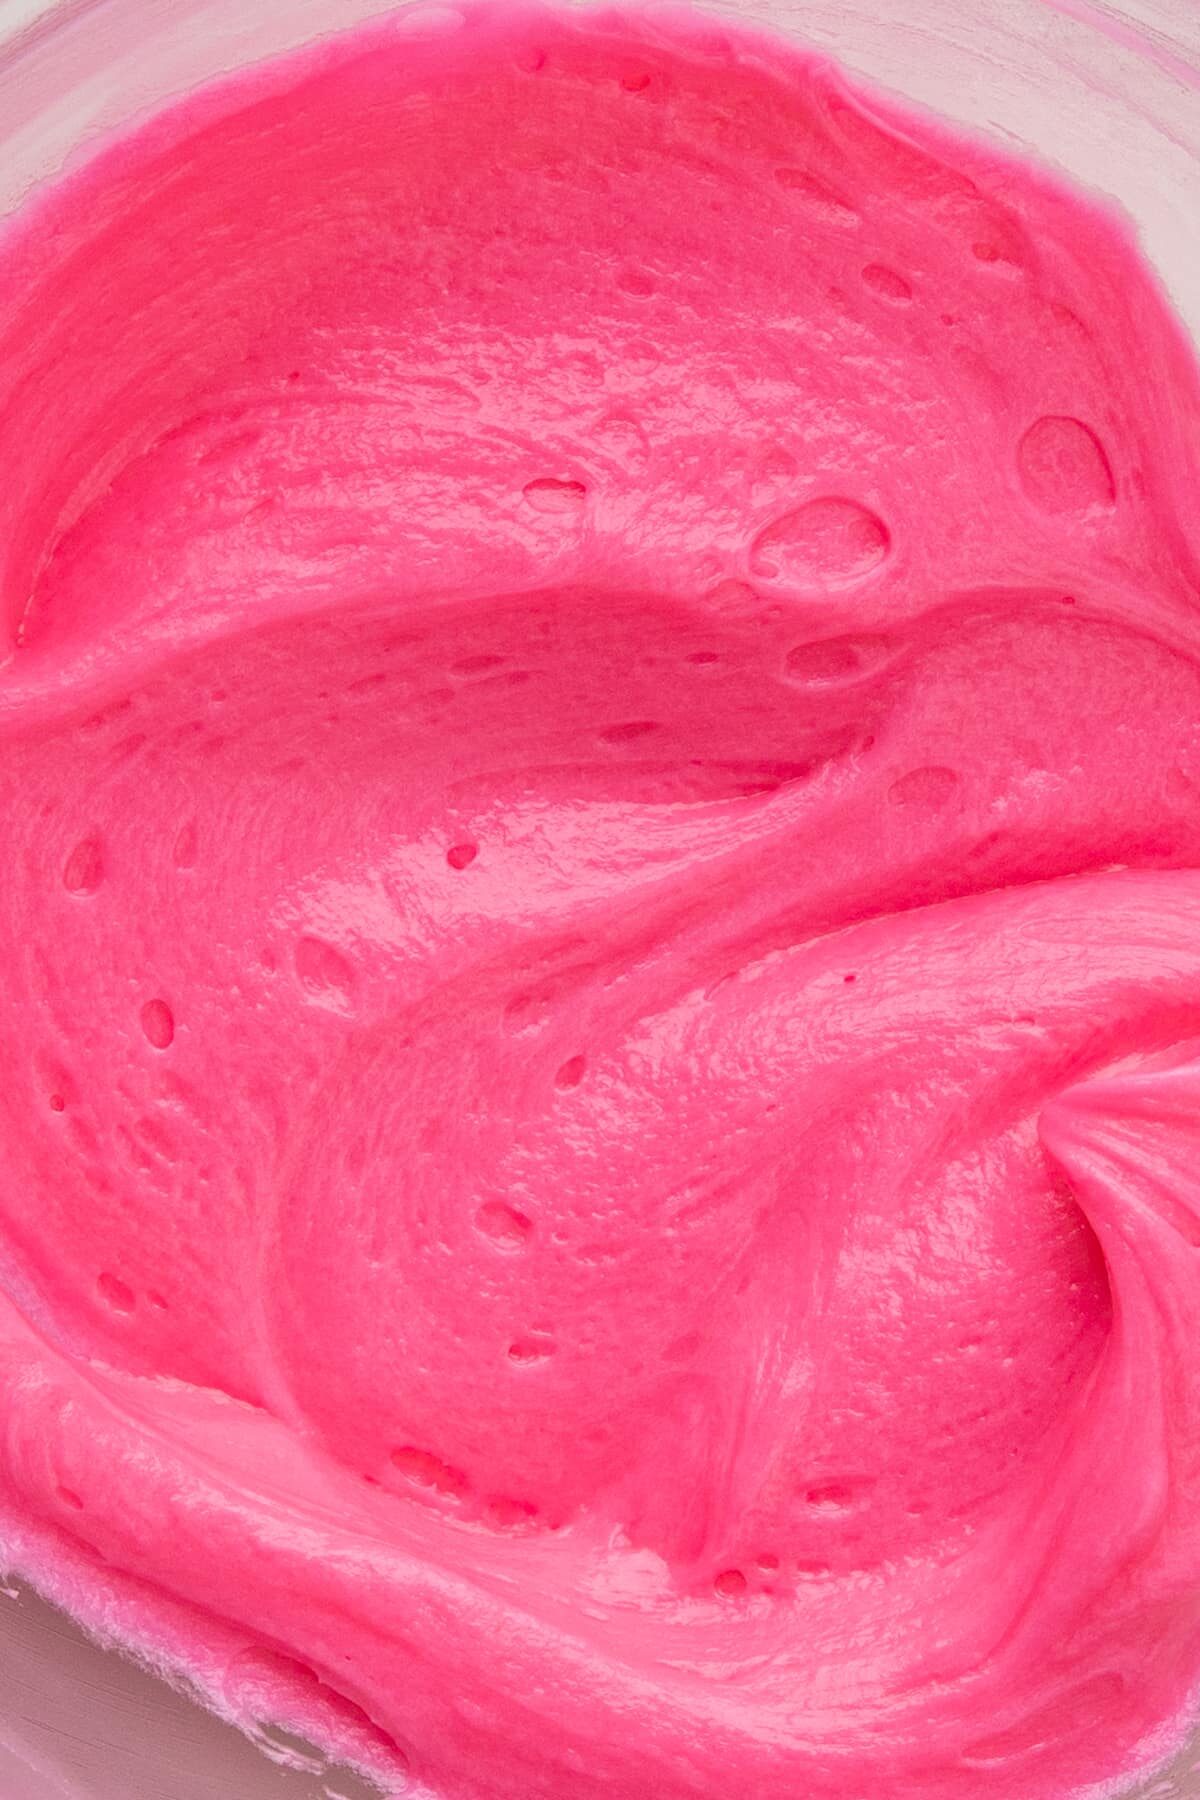 vibrant pink frosting in bowl up close.